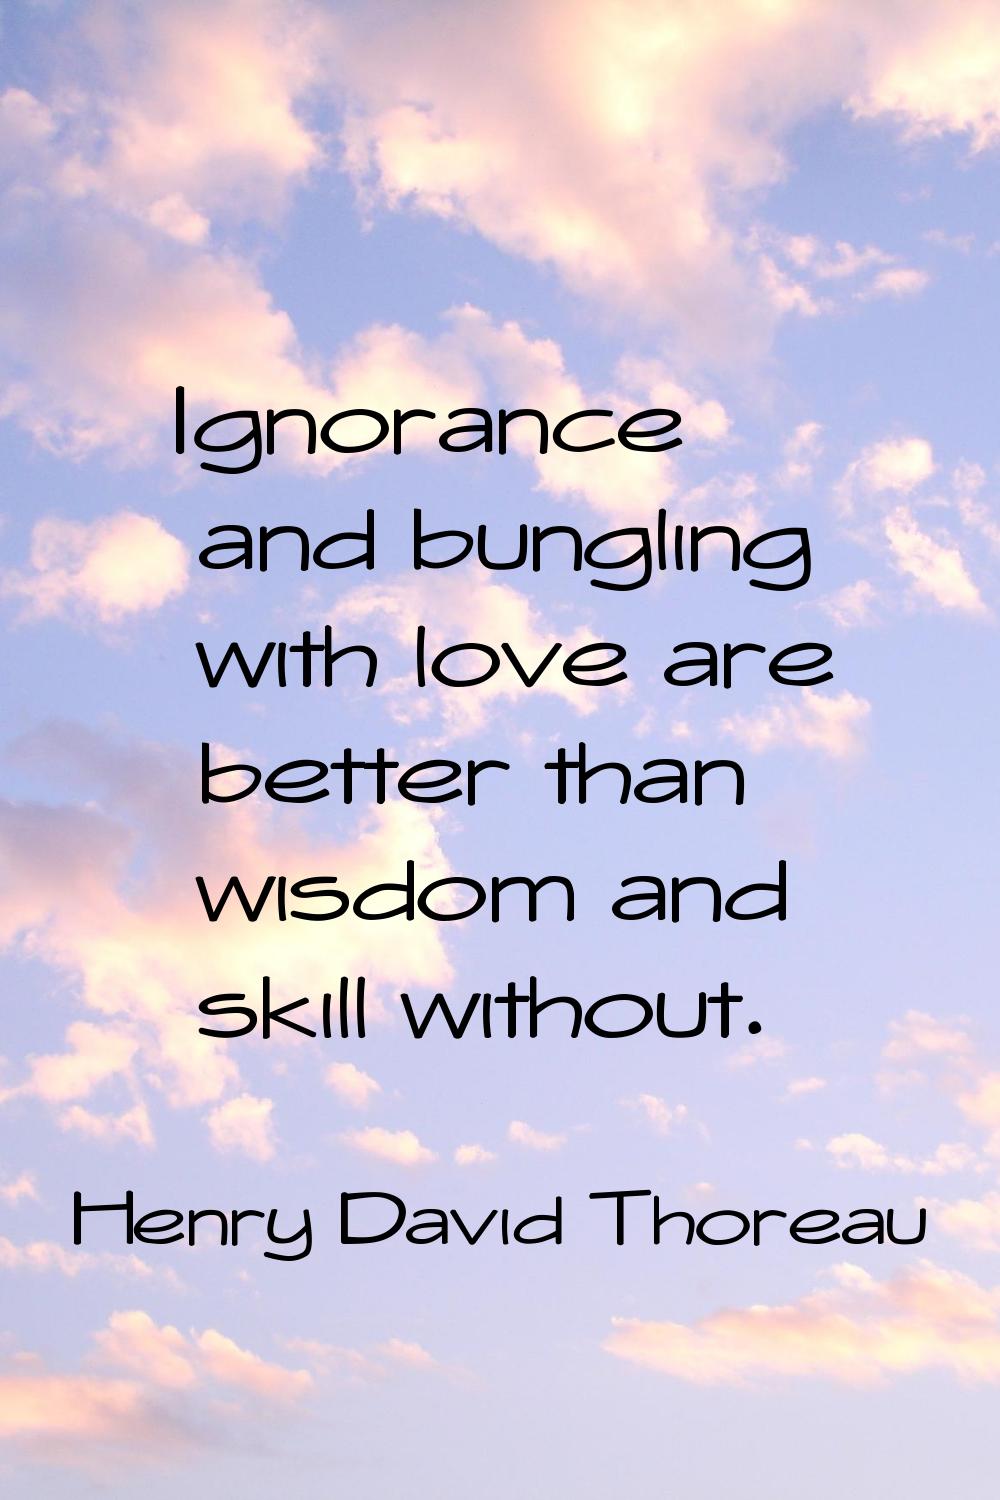 Ignorance and bungling with love are better than wisdom and skill without.